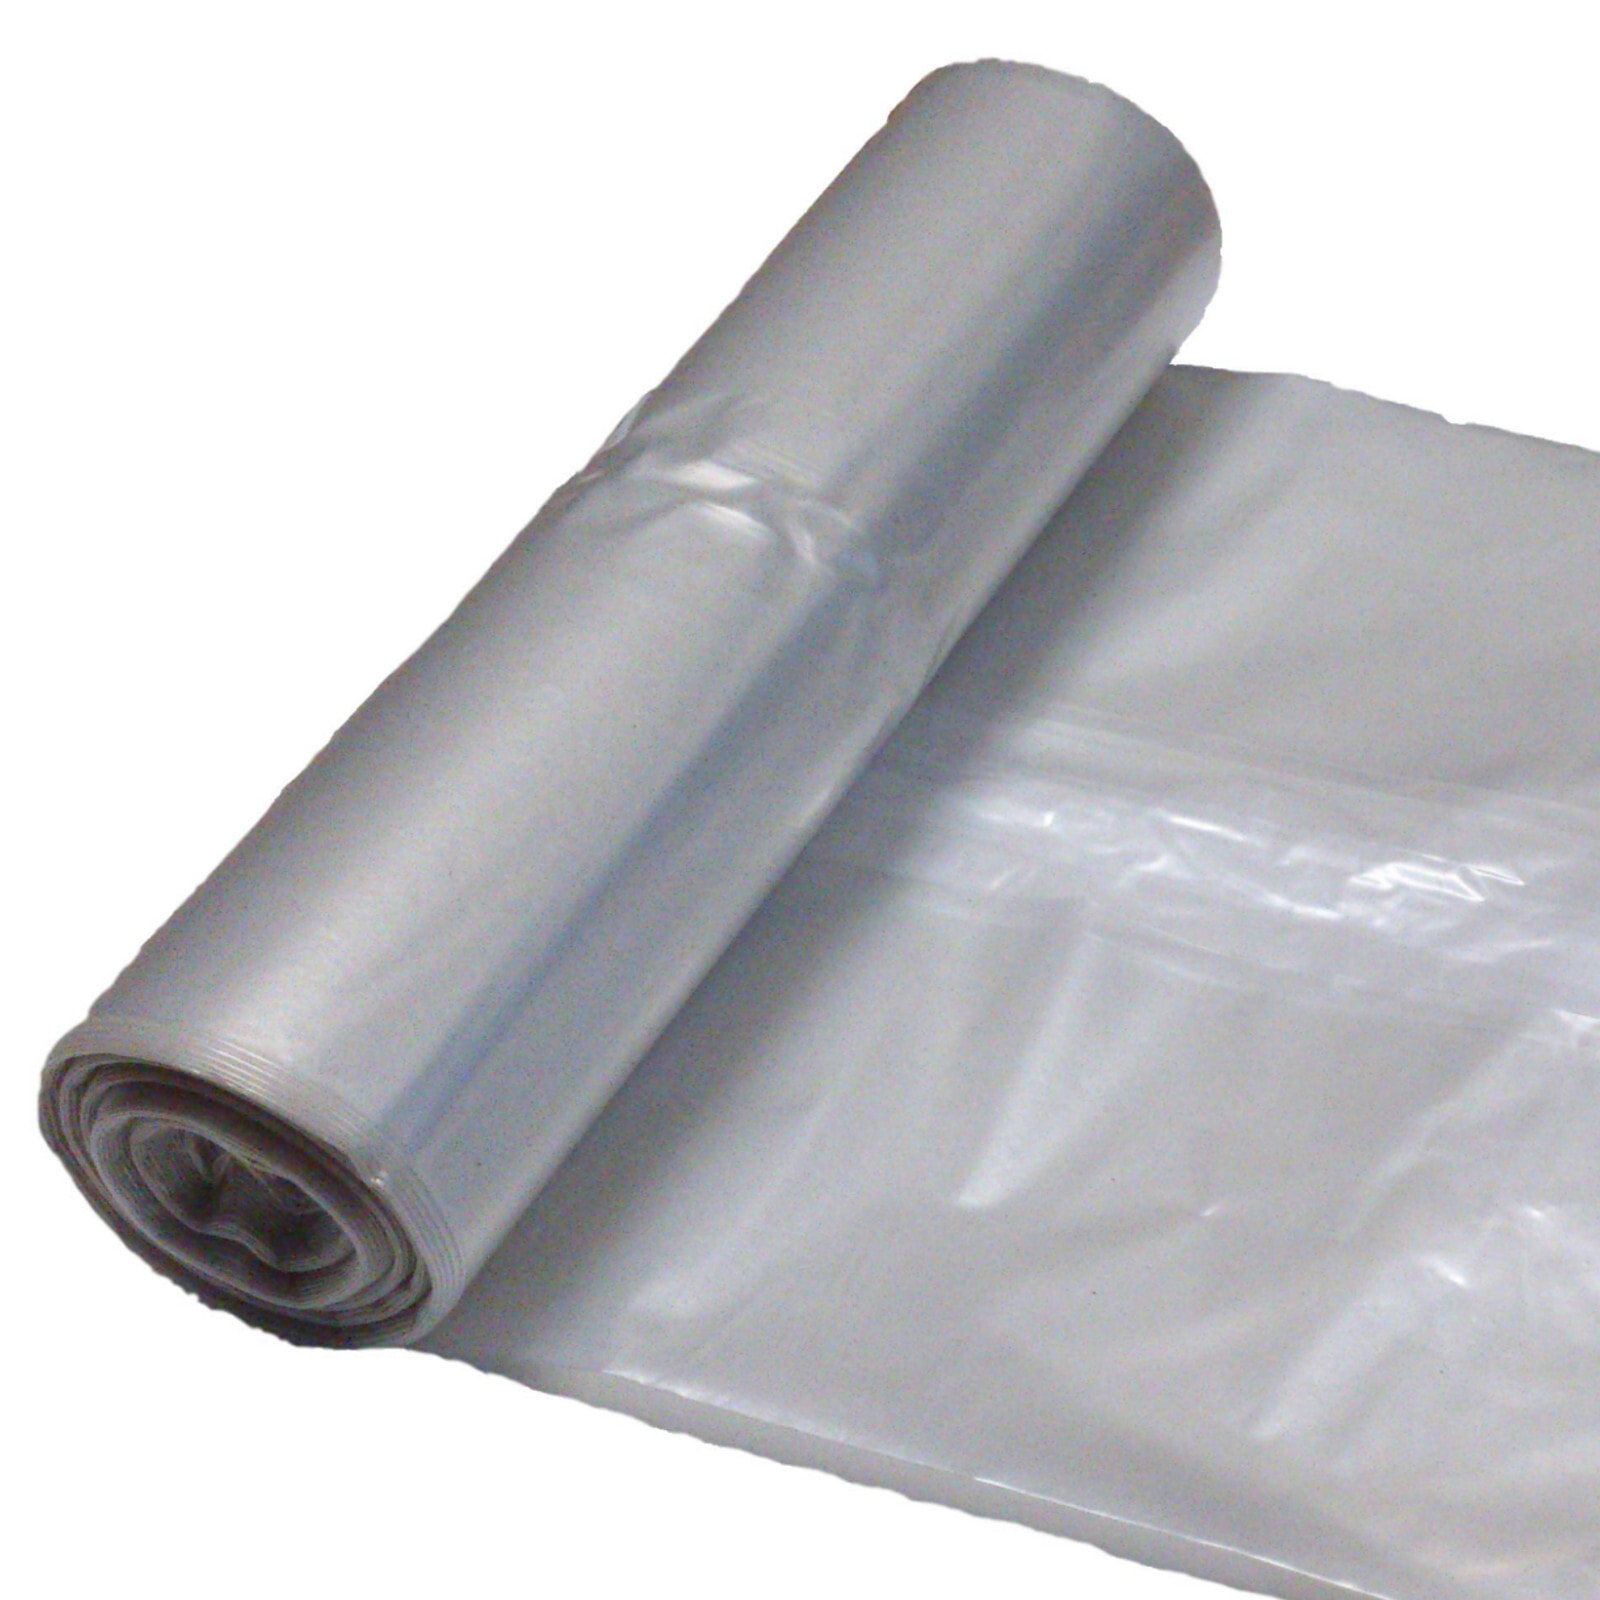 50 micron thick garbage bags. durable roll 25 pcs. - transparent 120L